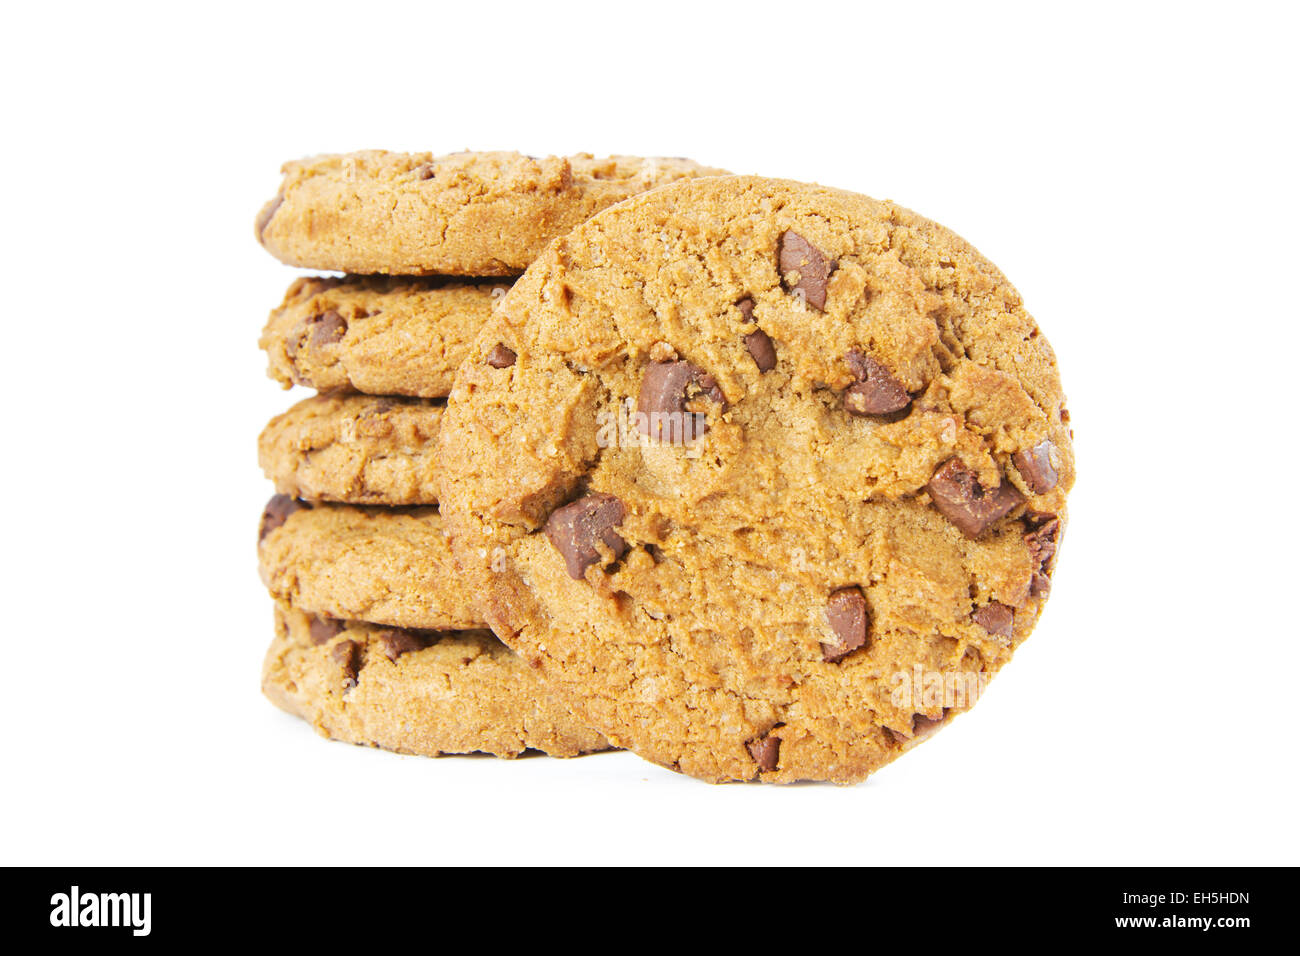 A stack of chokolate chip cookies on white background. Stock Photo